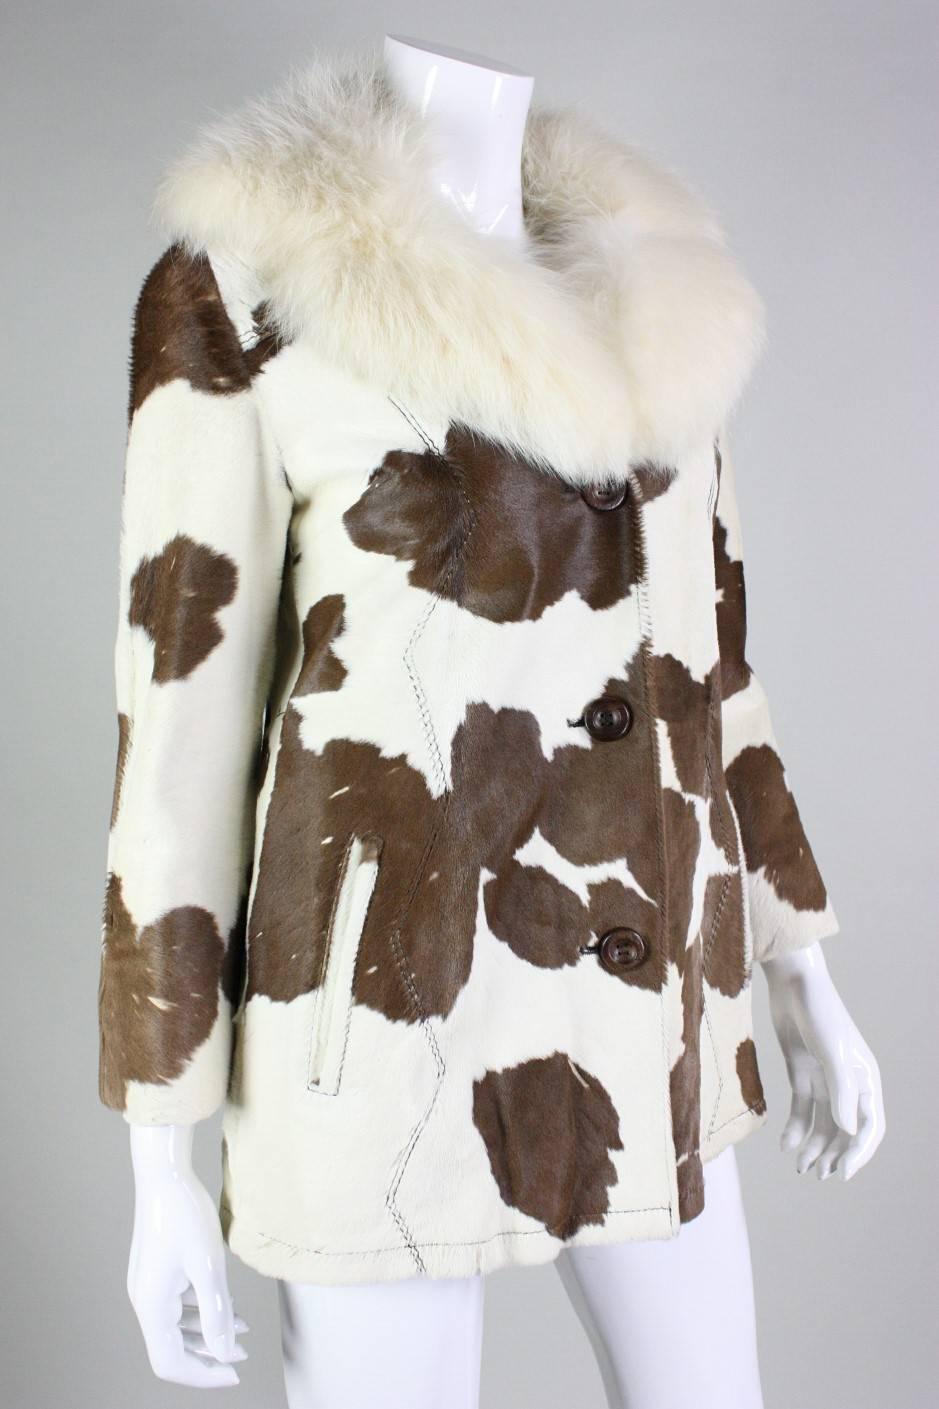 Vintage jacket from Revillon Boutique retailed at Saks Fifth Avenue and dates to the 1970's.  It is made of white and brown spotted calfskin with a white fox fur collar.  Large zigzag vertical top-stitching on front and back sides.  Hip pockets.